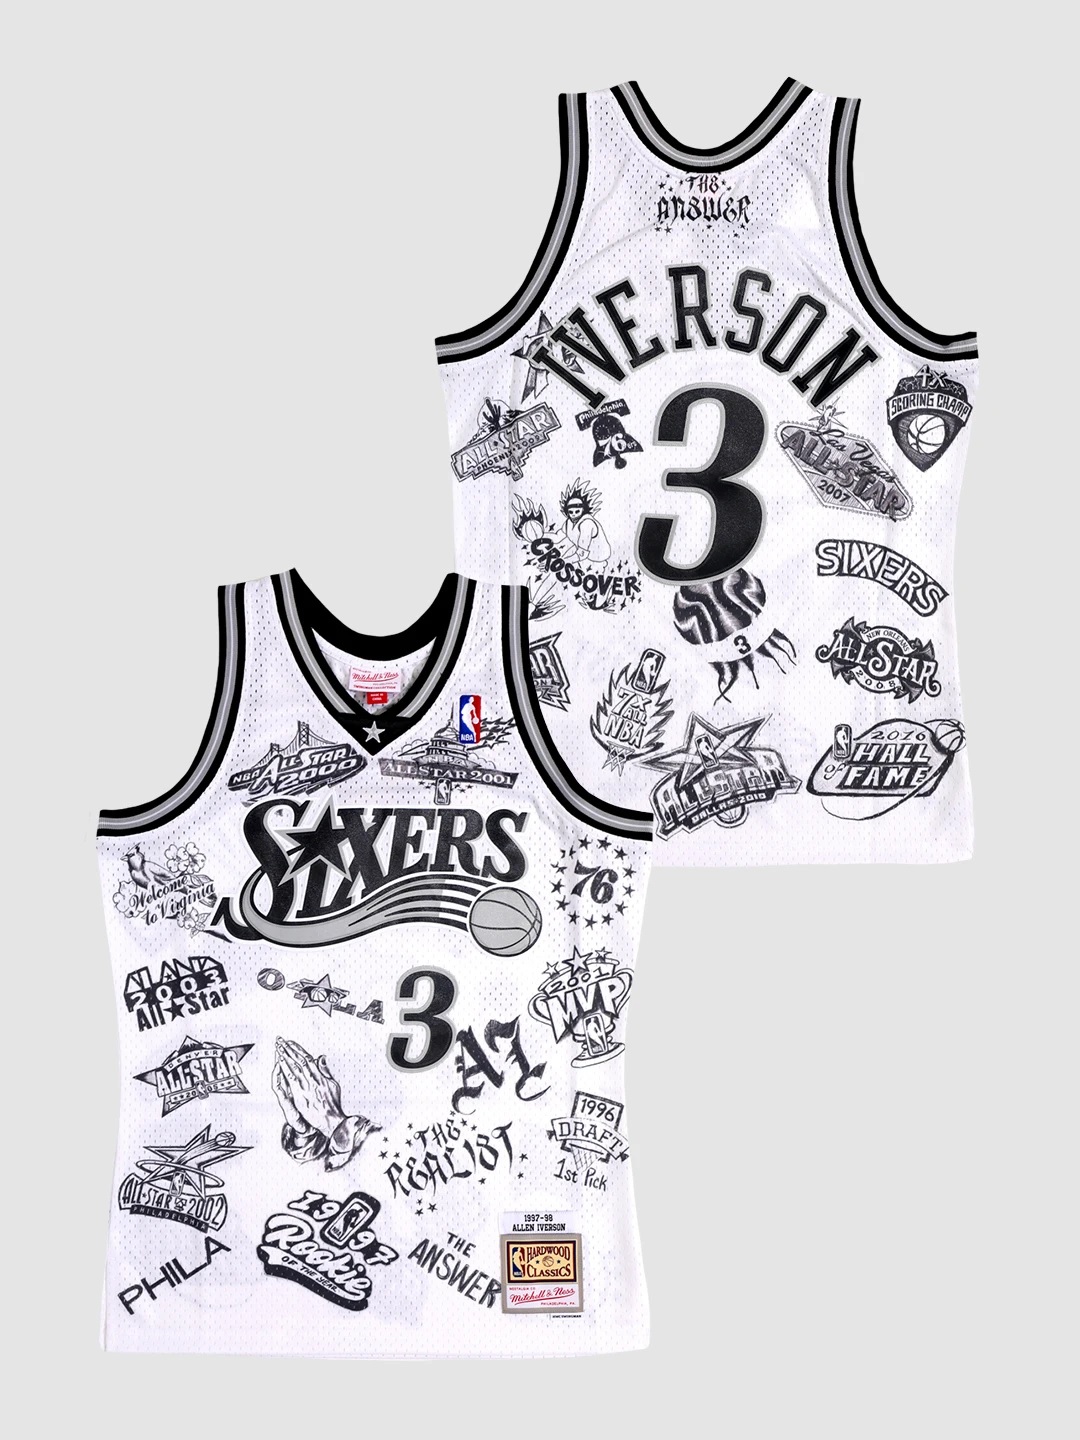 Mitchell & Ness Men's Allen Iverson White Eastern Conference 2003